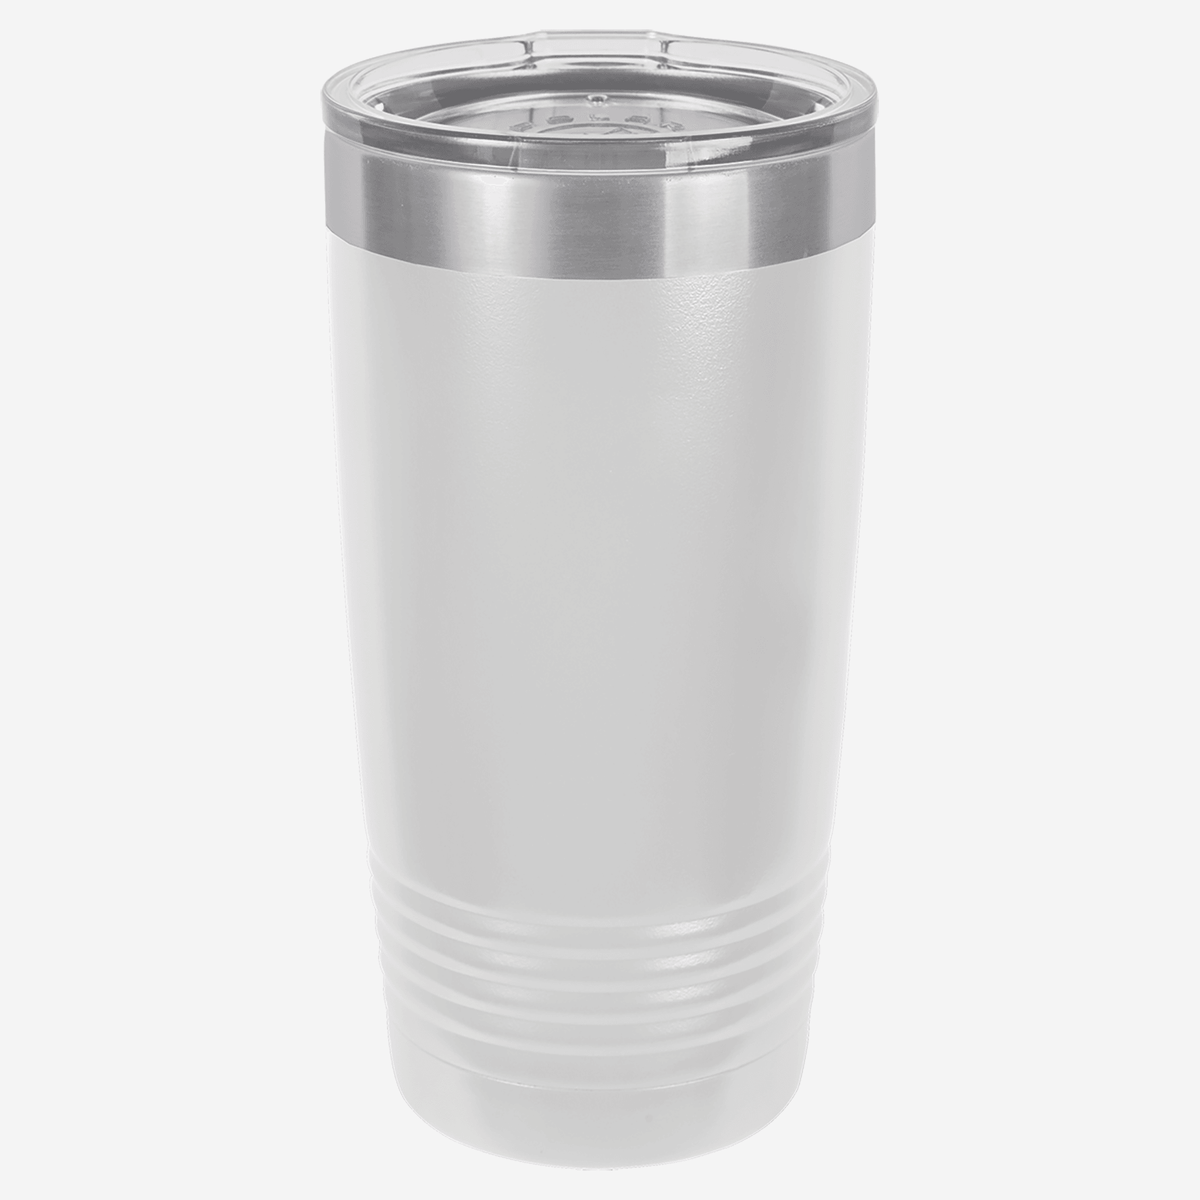 20 oz. white stainless steel tumbler with lid grip rings on the bottom